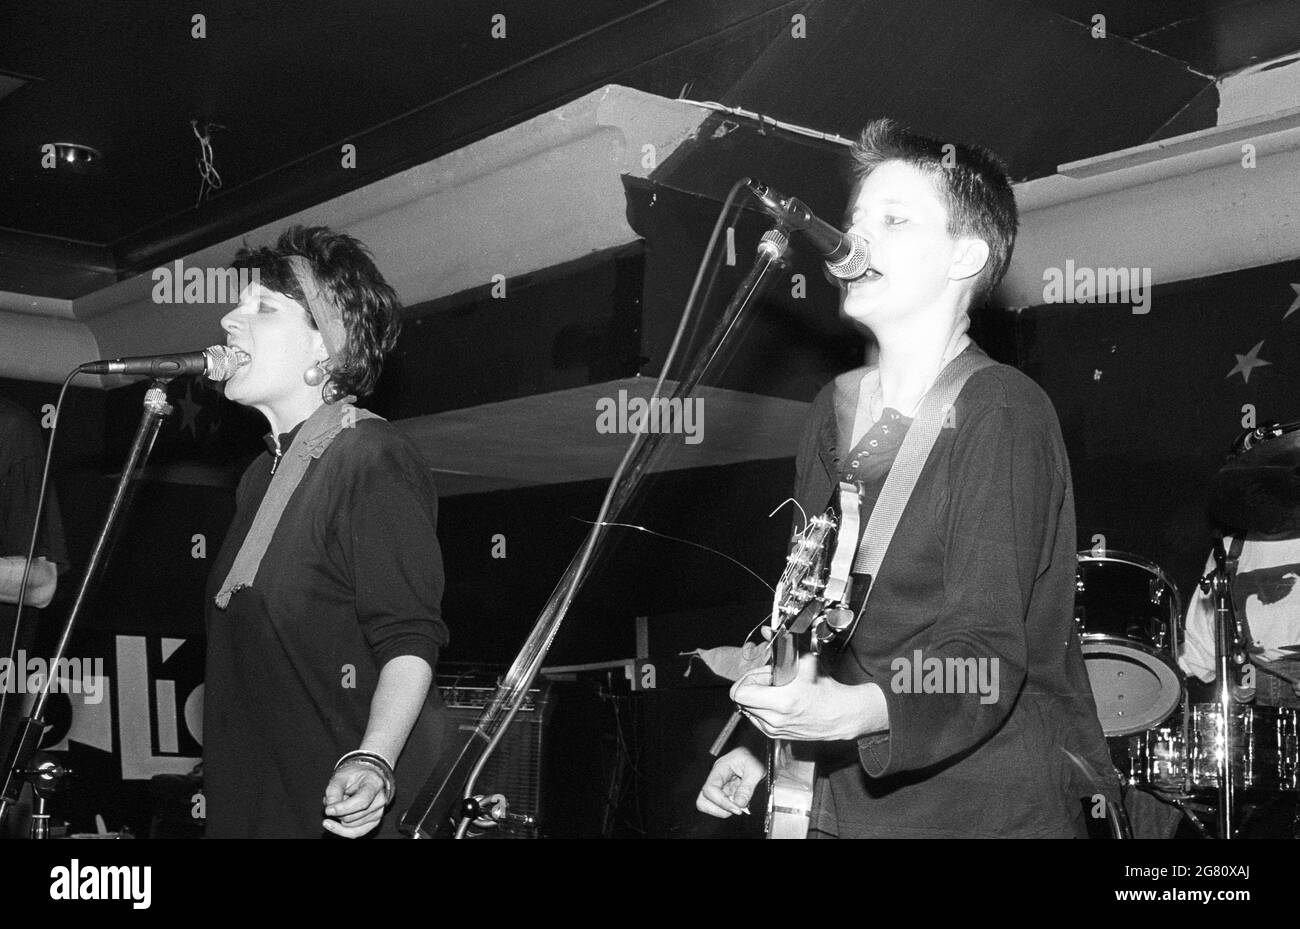 Jacqui Callis and Paula Richards of the Renees performing at an unknown venue in London in 1990. Stock Photo